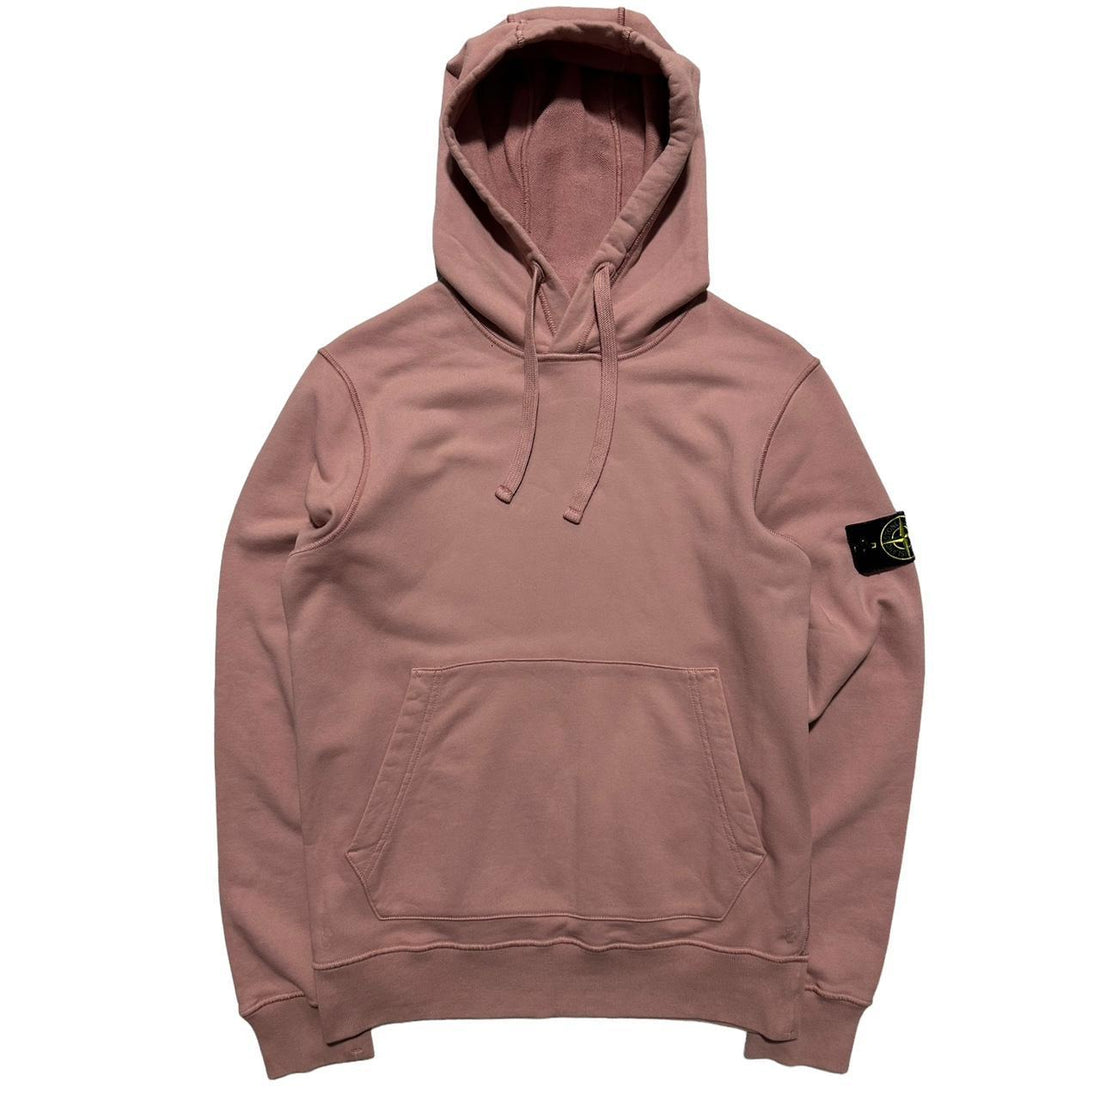 Stone Island Dusty Pink Pullover Hoodie